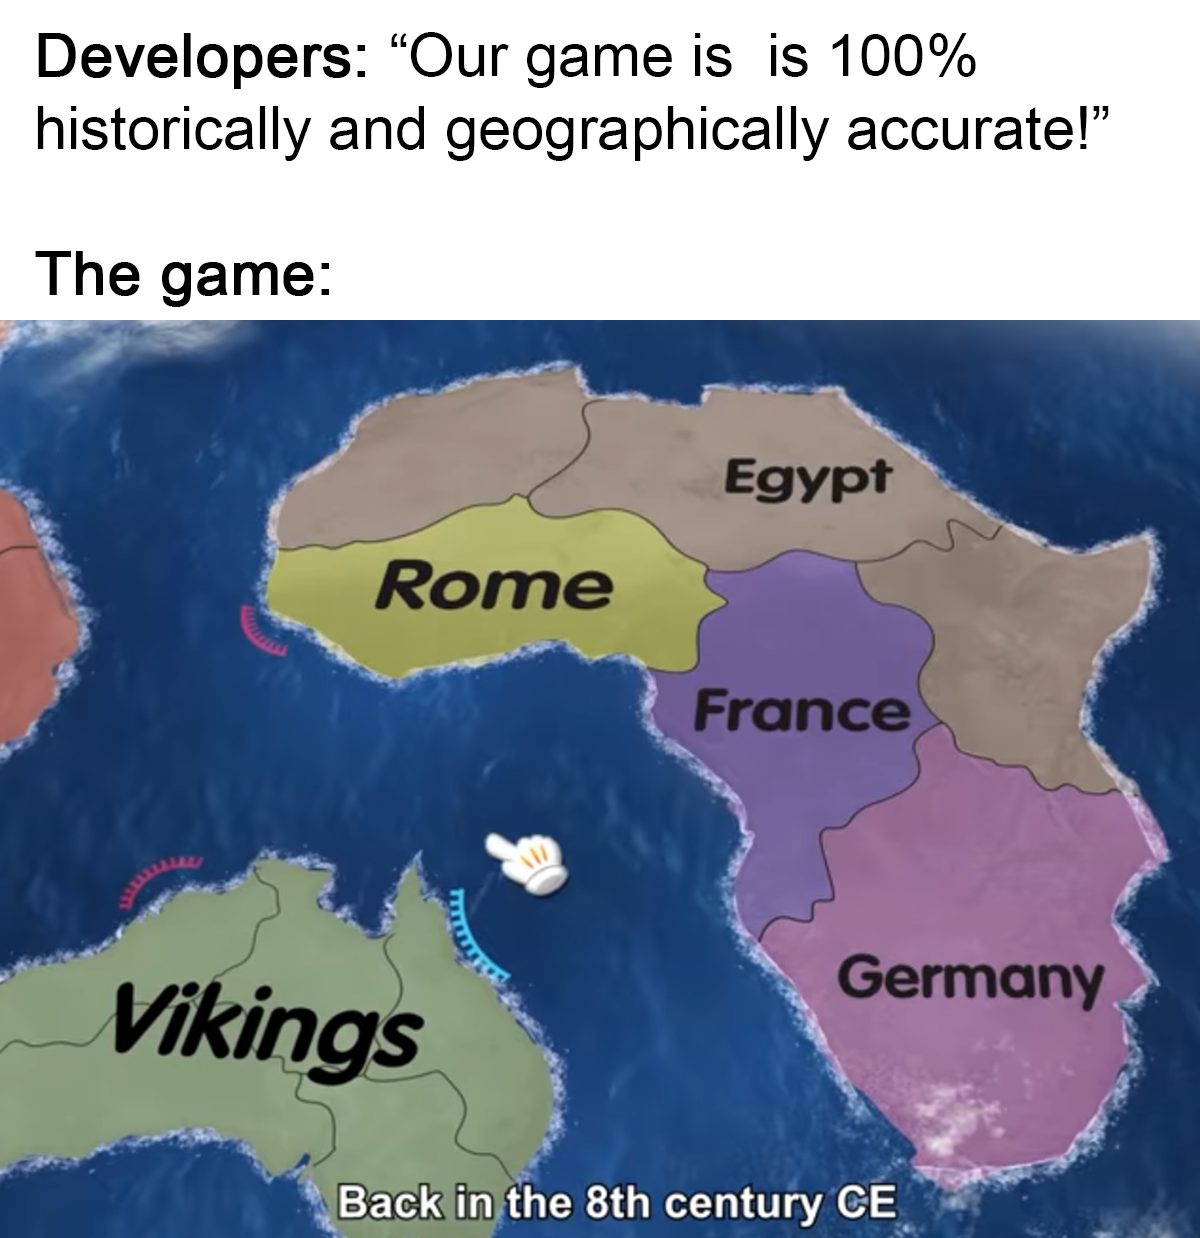 funny memes - map - Developers "Our game is is 100% historically and geographically accurate!" The game Rome Vikings Pitan Egypt France Germany Back in the 8th century Ce